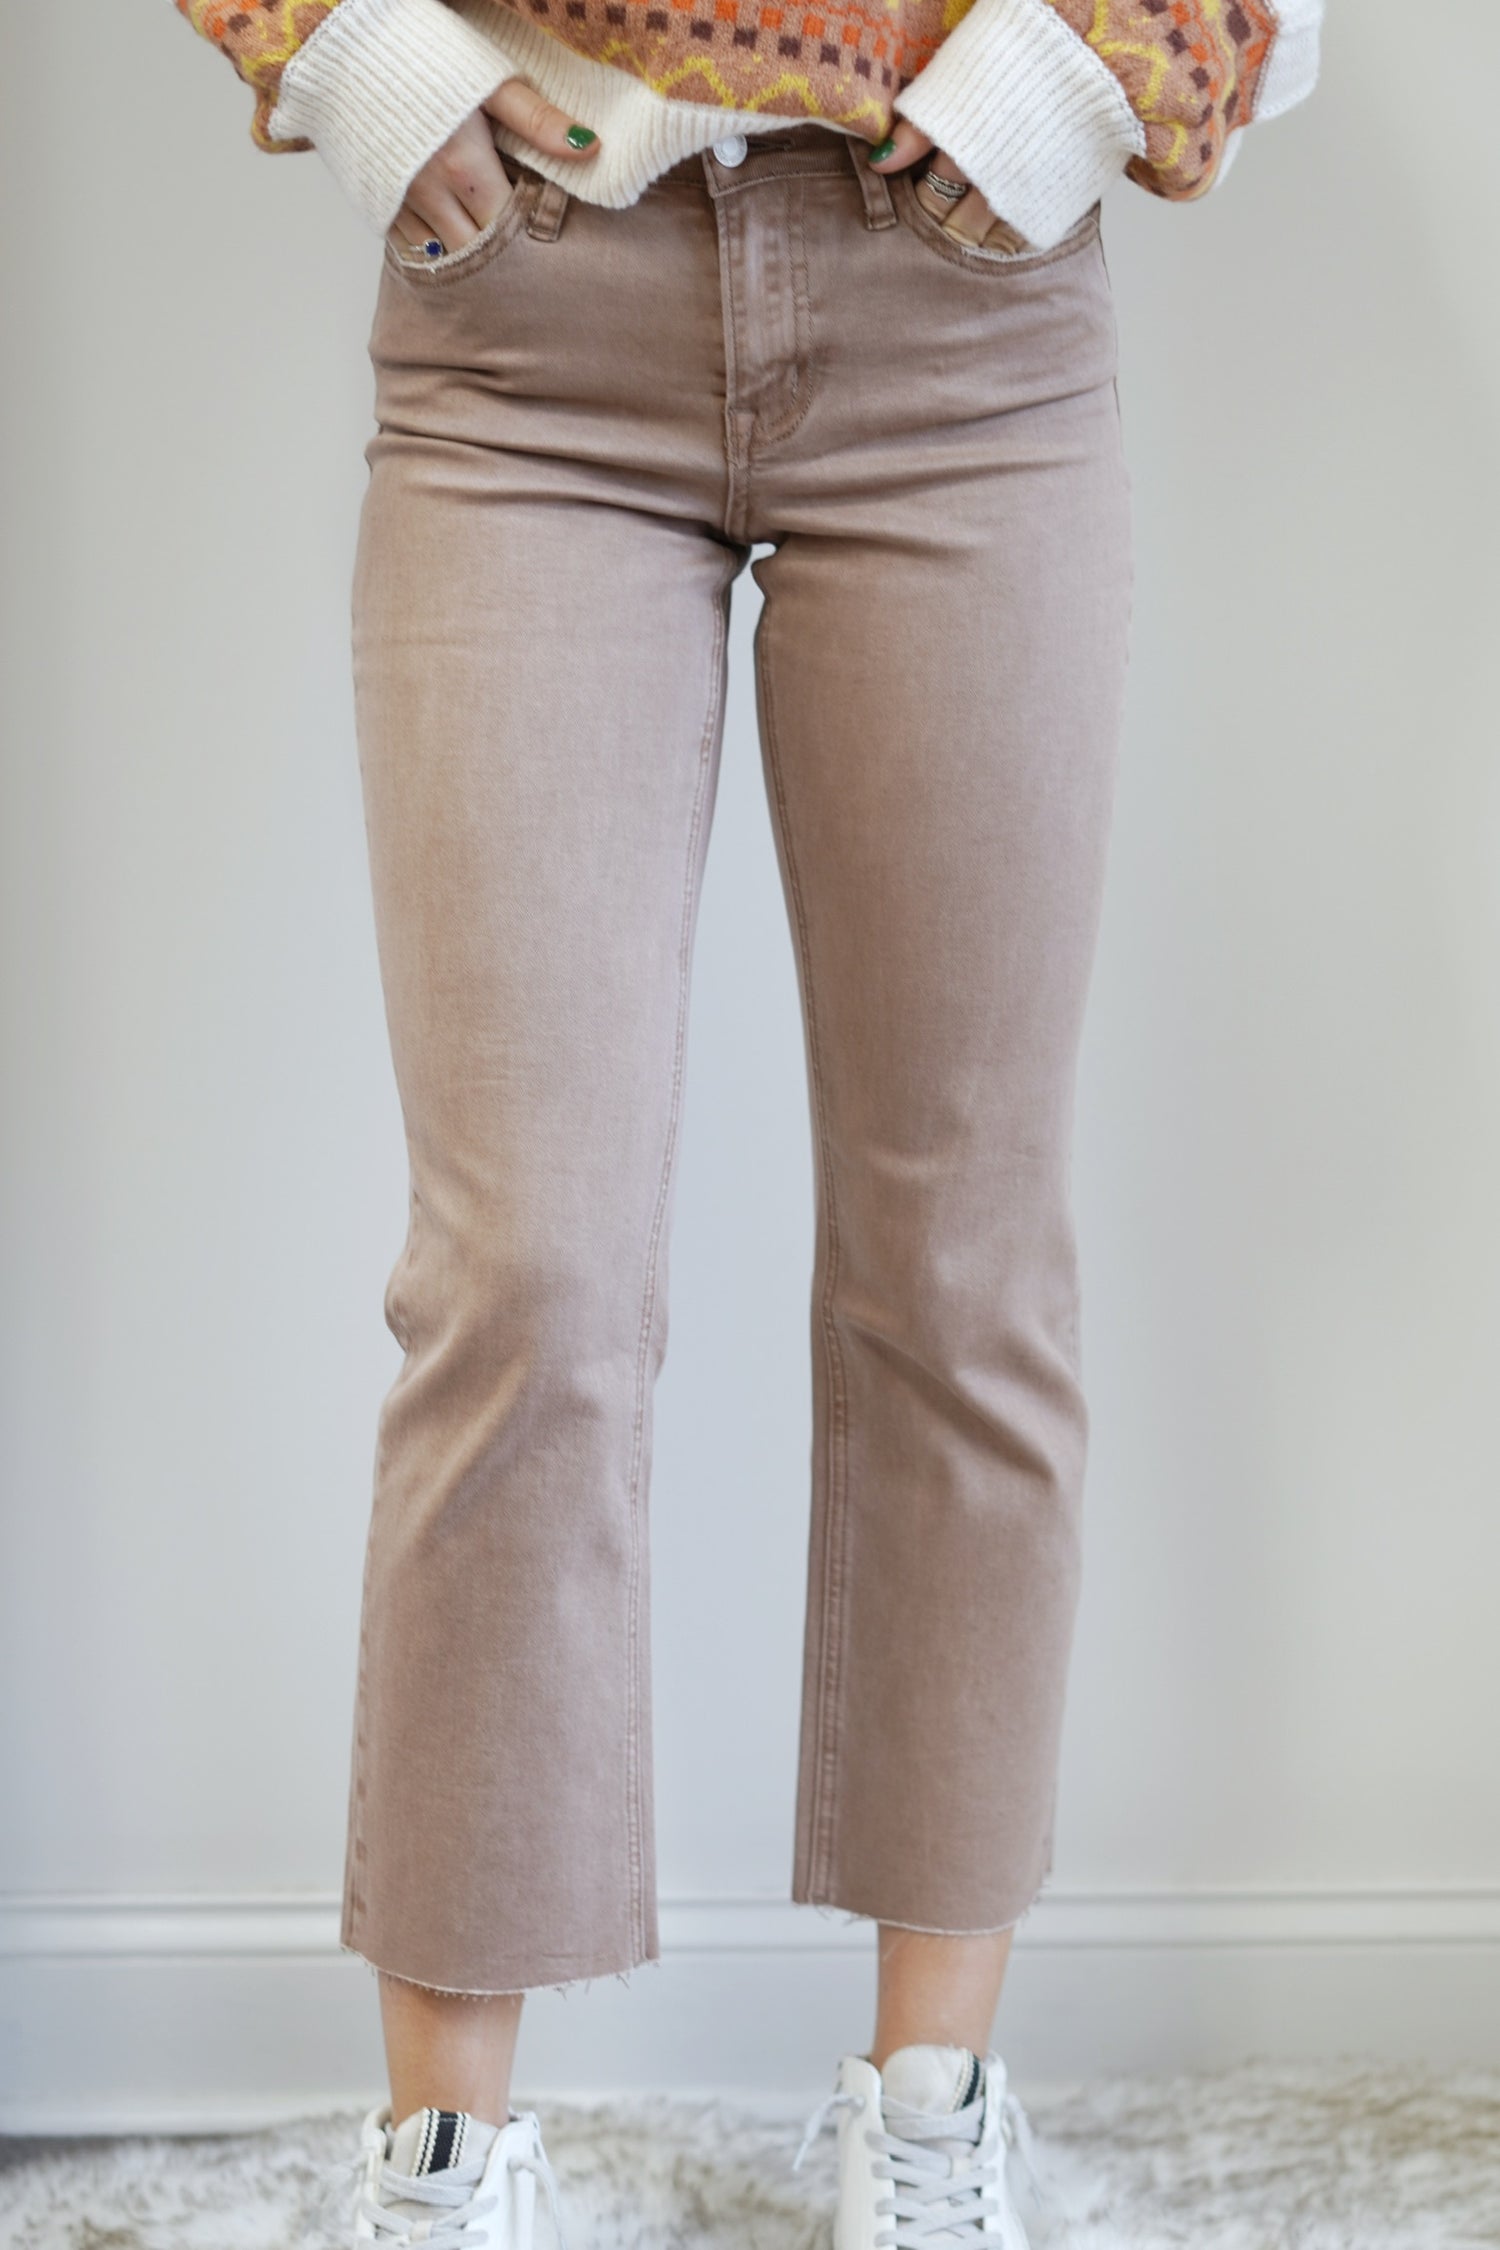 Kira Cropped Desert Taupe Straight Leg Jeans Mid Rise Zipper Fly Closure Color: Desert Taupe Cropped Length Fitted Straight Legs 93% Cotton, 5% Polyester, 2% Spandex